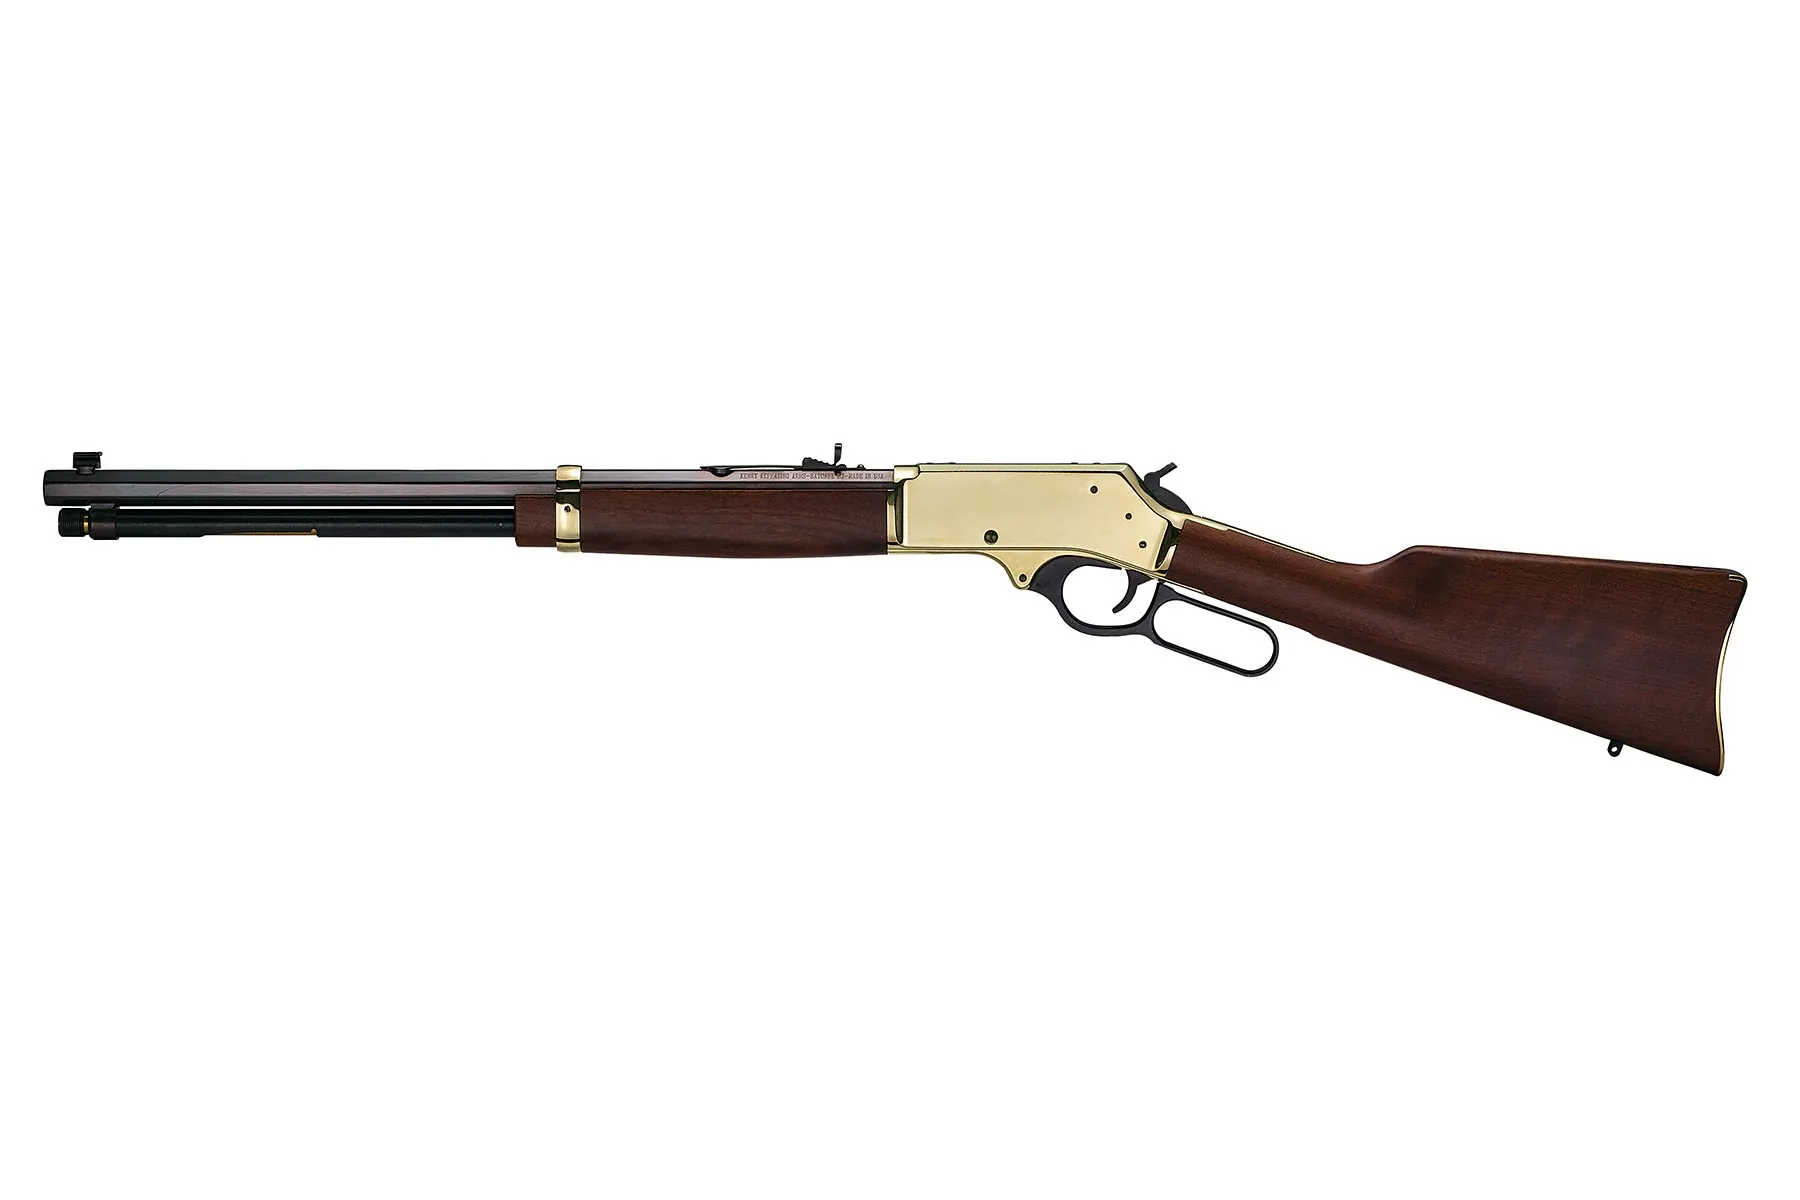 Brass Lever Action .30-30 Side Gate